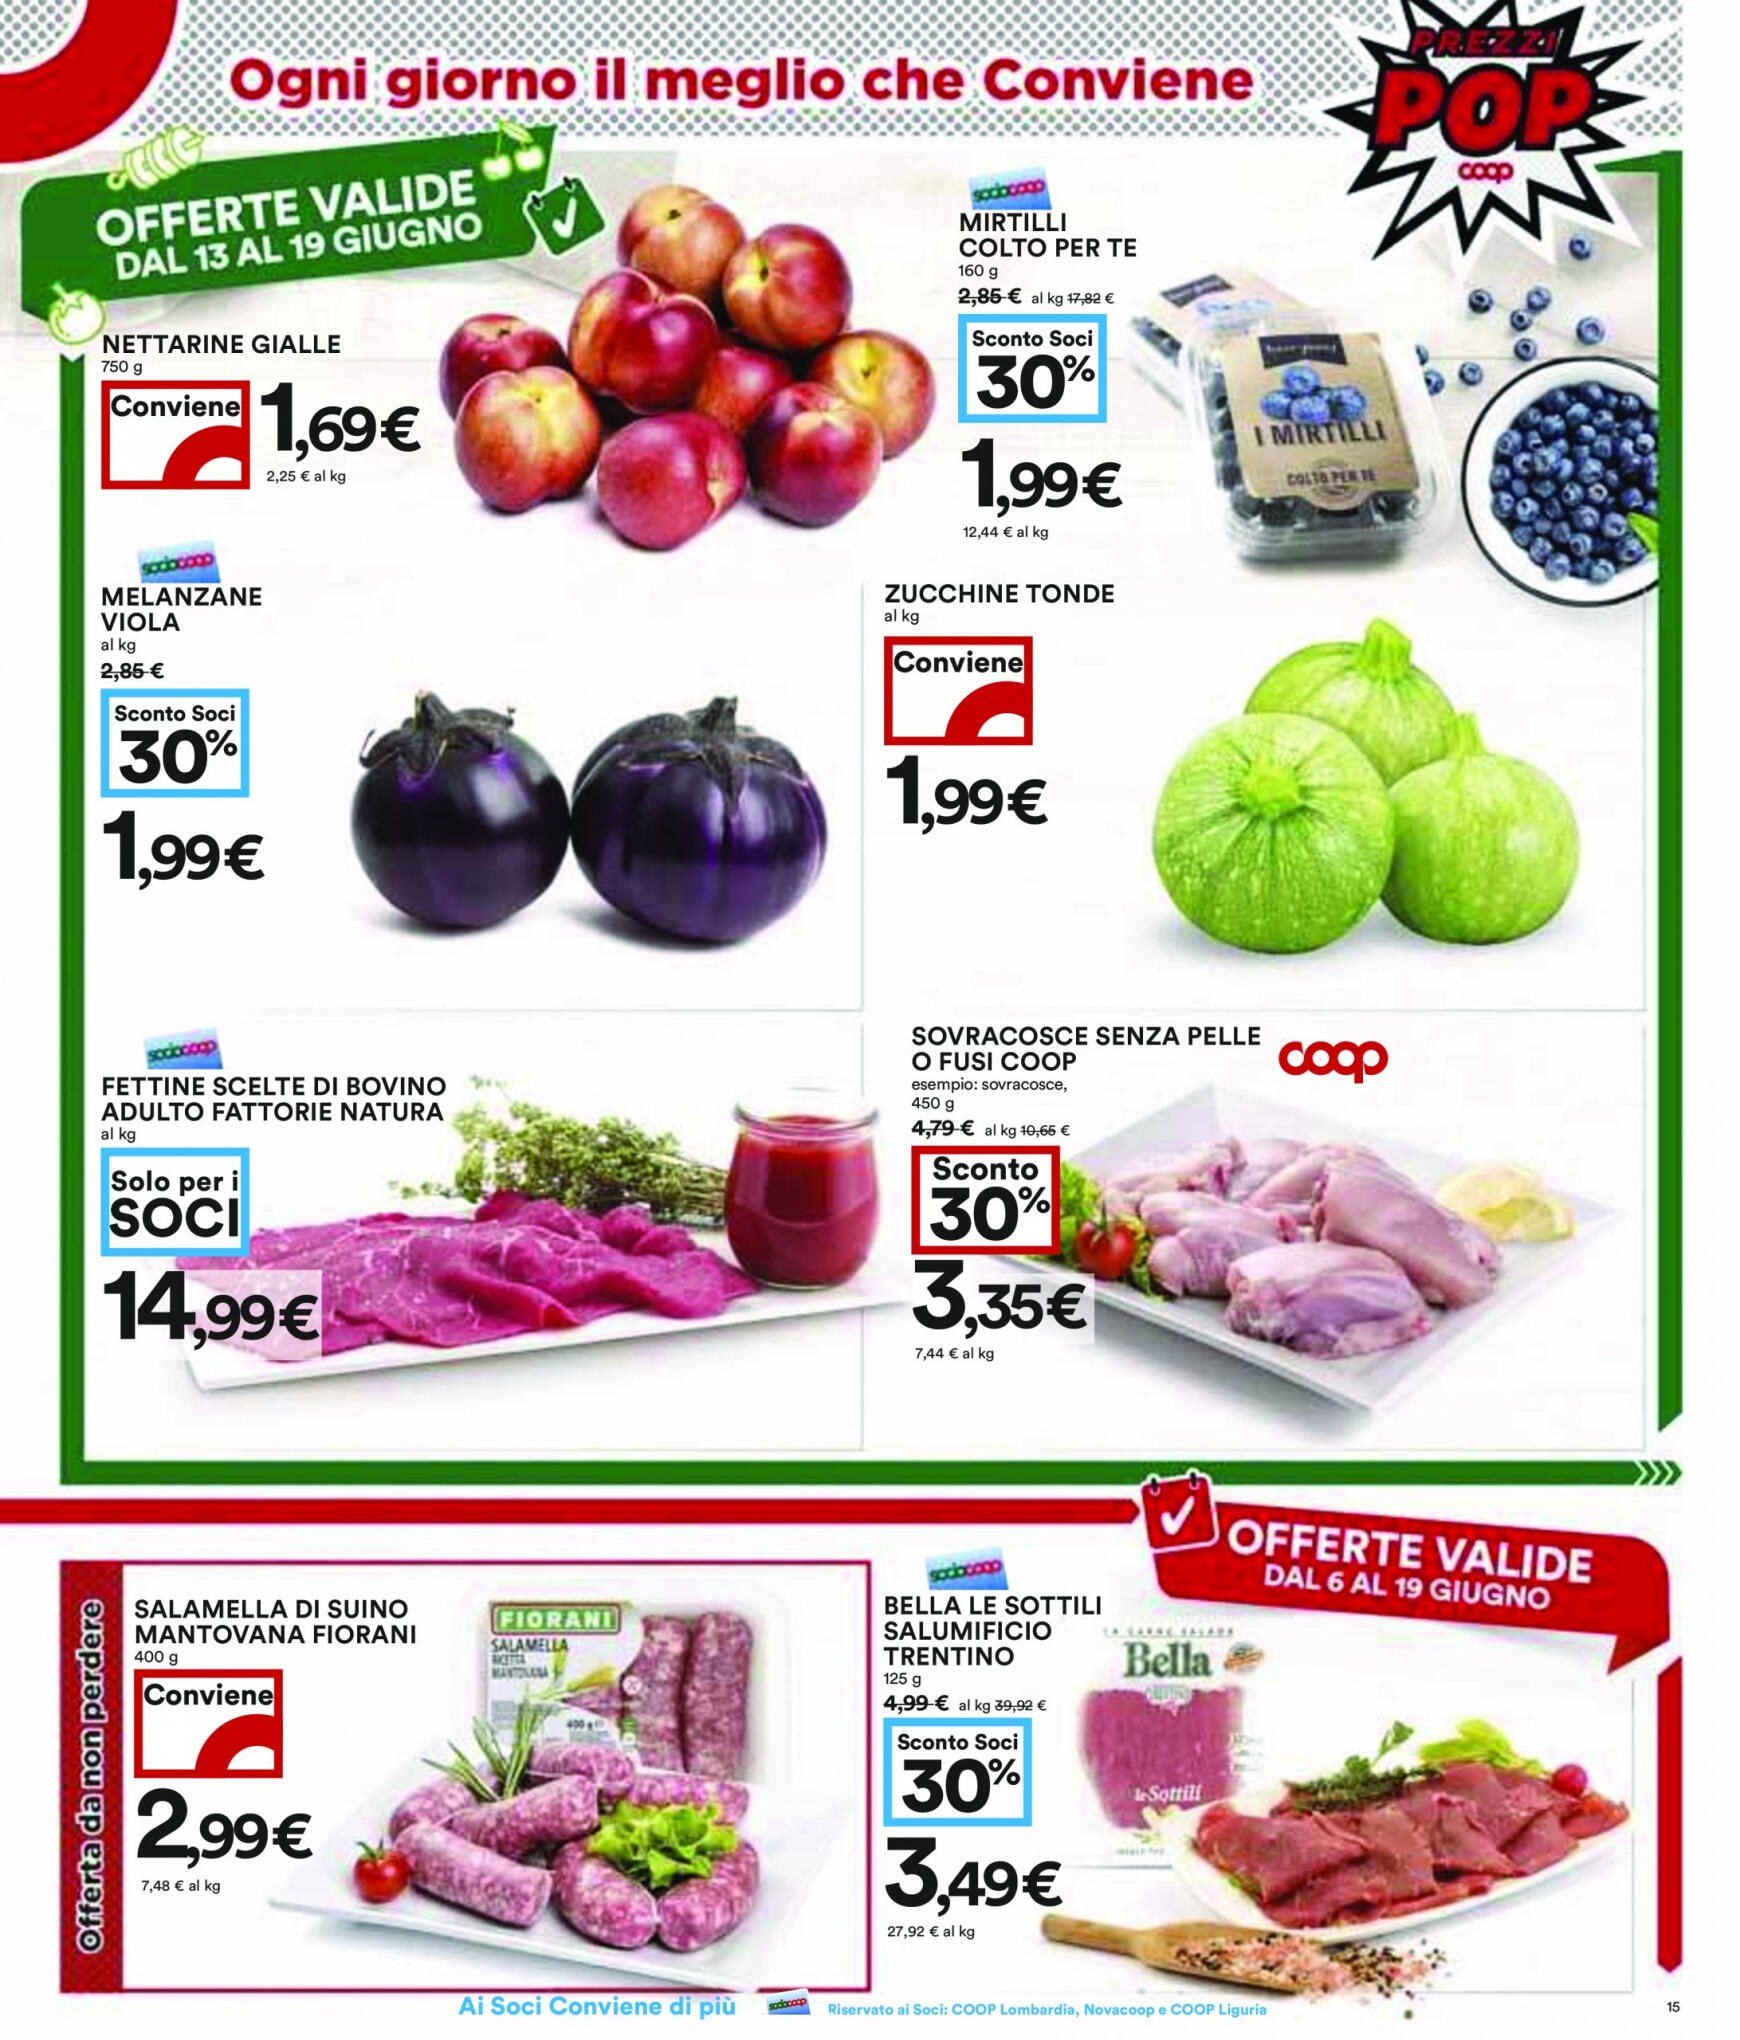 coop - Nuovo volantino Coop 10.06. - 19.06. - page: 15